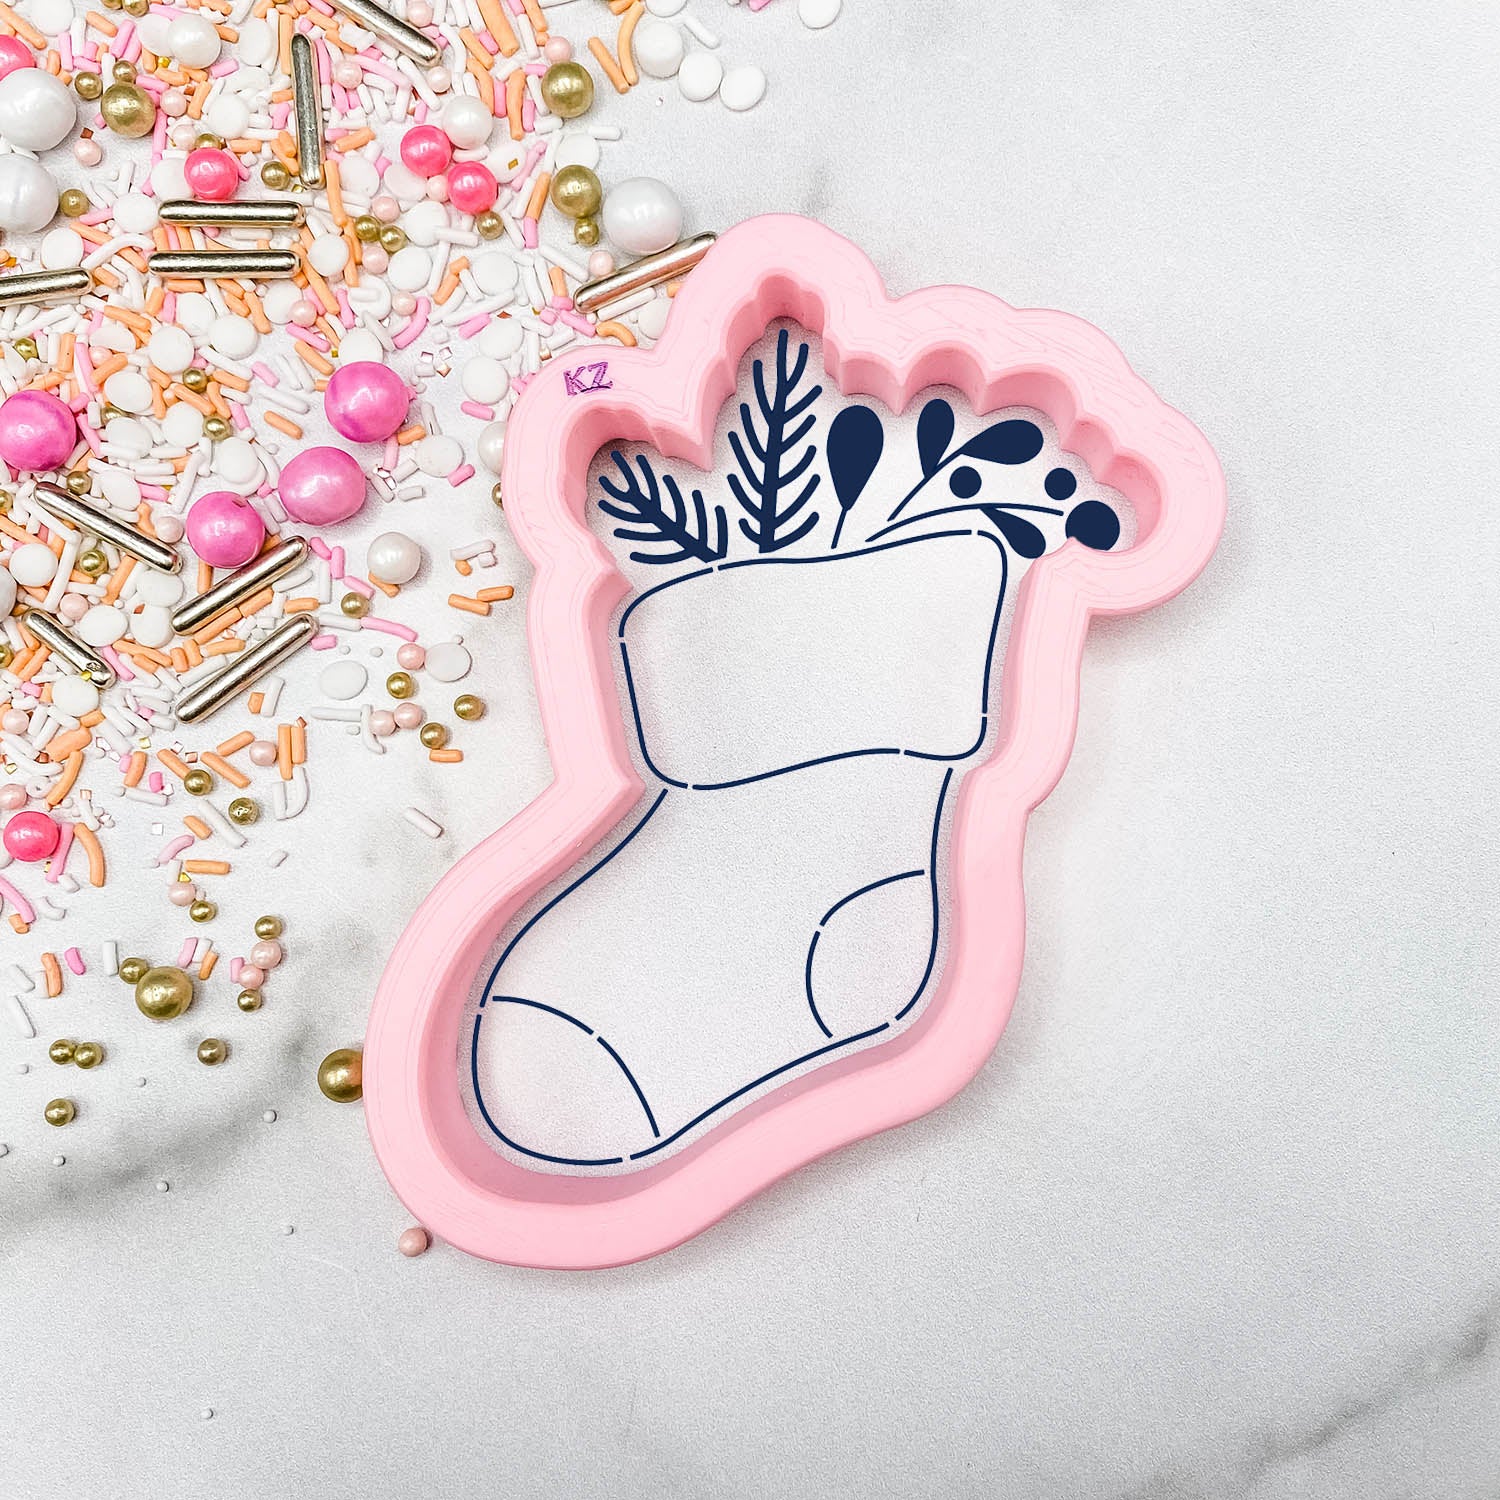 Christmas Stocking Cutter/Stencil